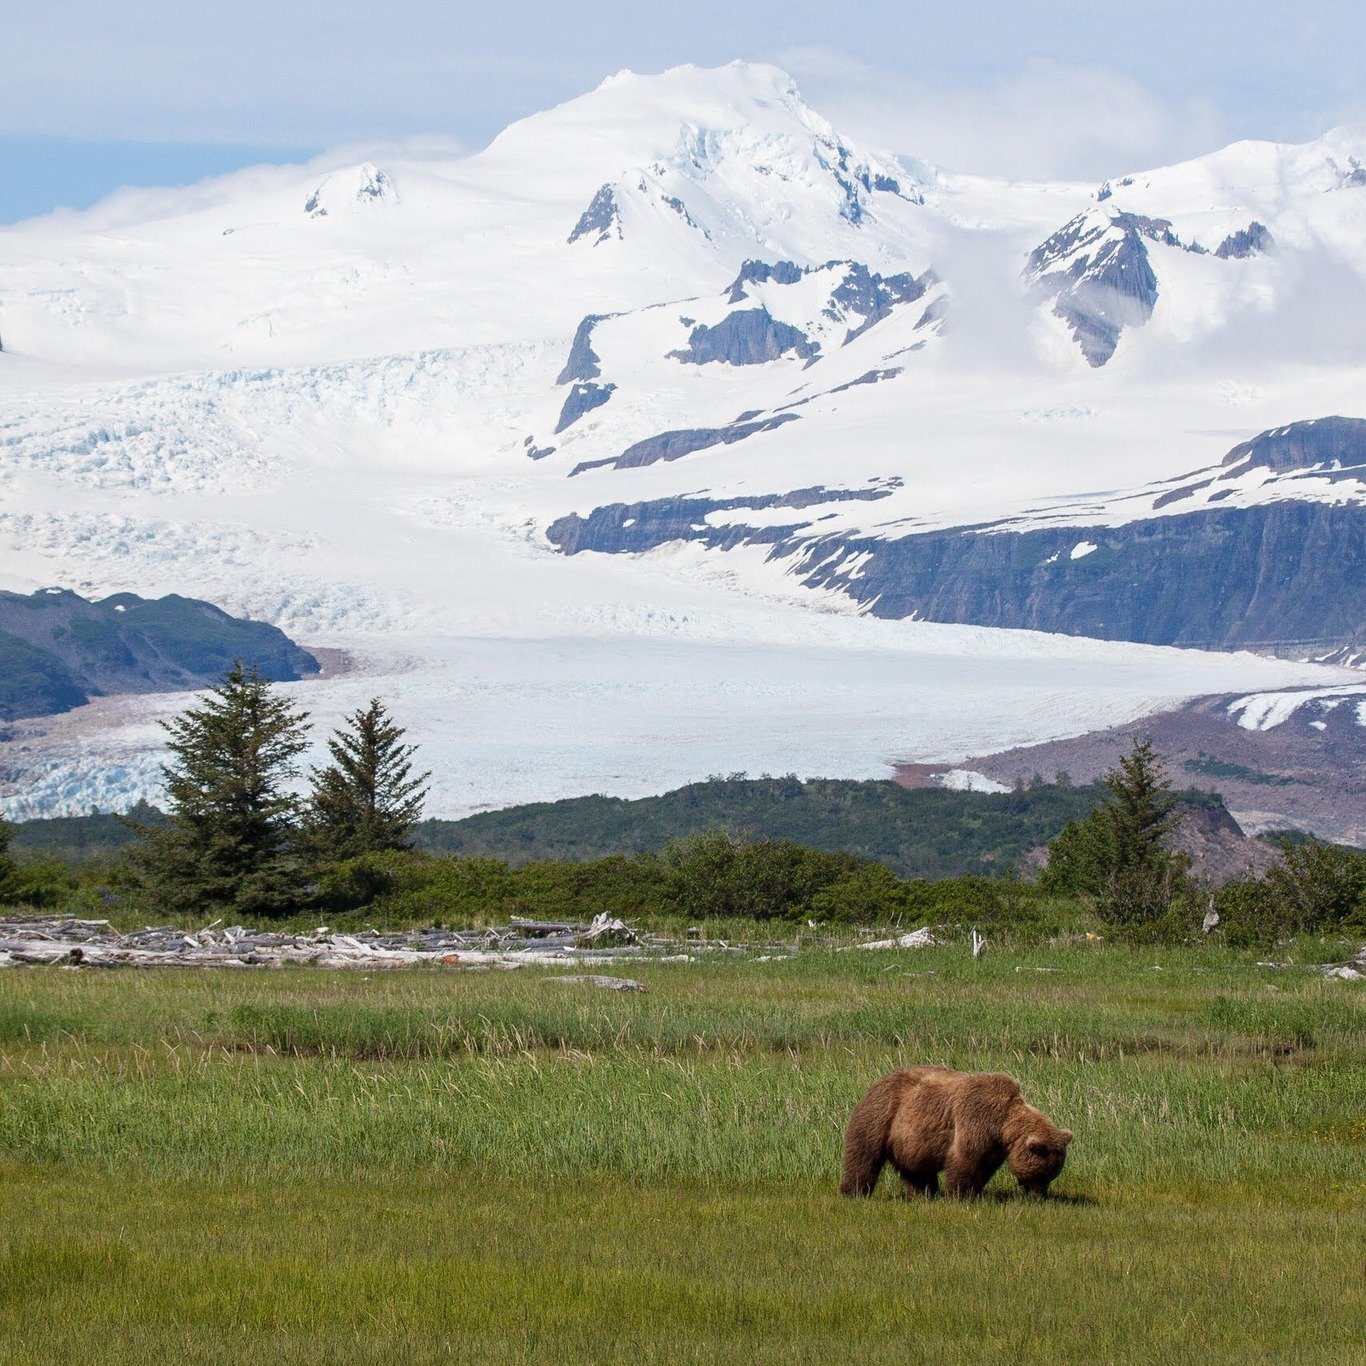 Don't hesitate&mdash;seize the opportunity to embark on a bear viewing trip this June!  Escape the July crowds and venture to the stunning coastline of Katmai National Park to witness the magnificent sight of bears emerging from hibernation. Experien